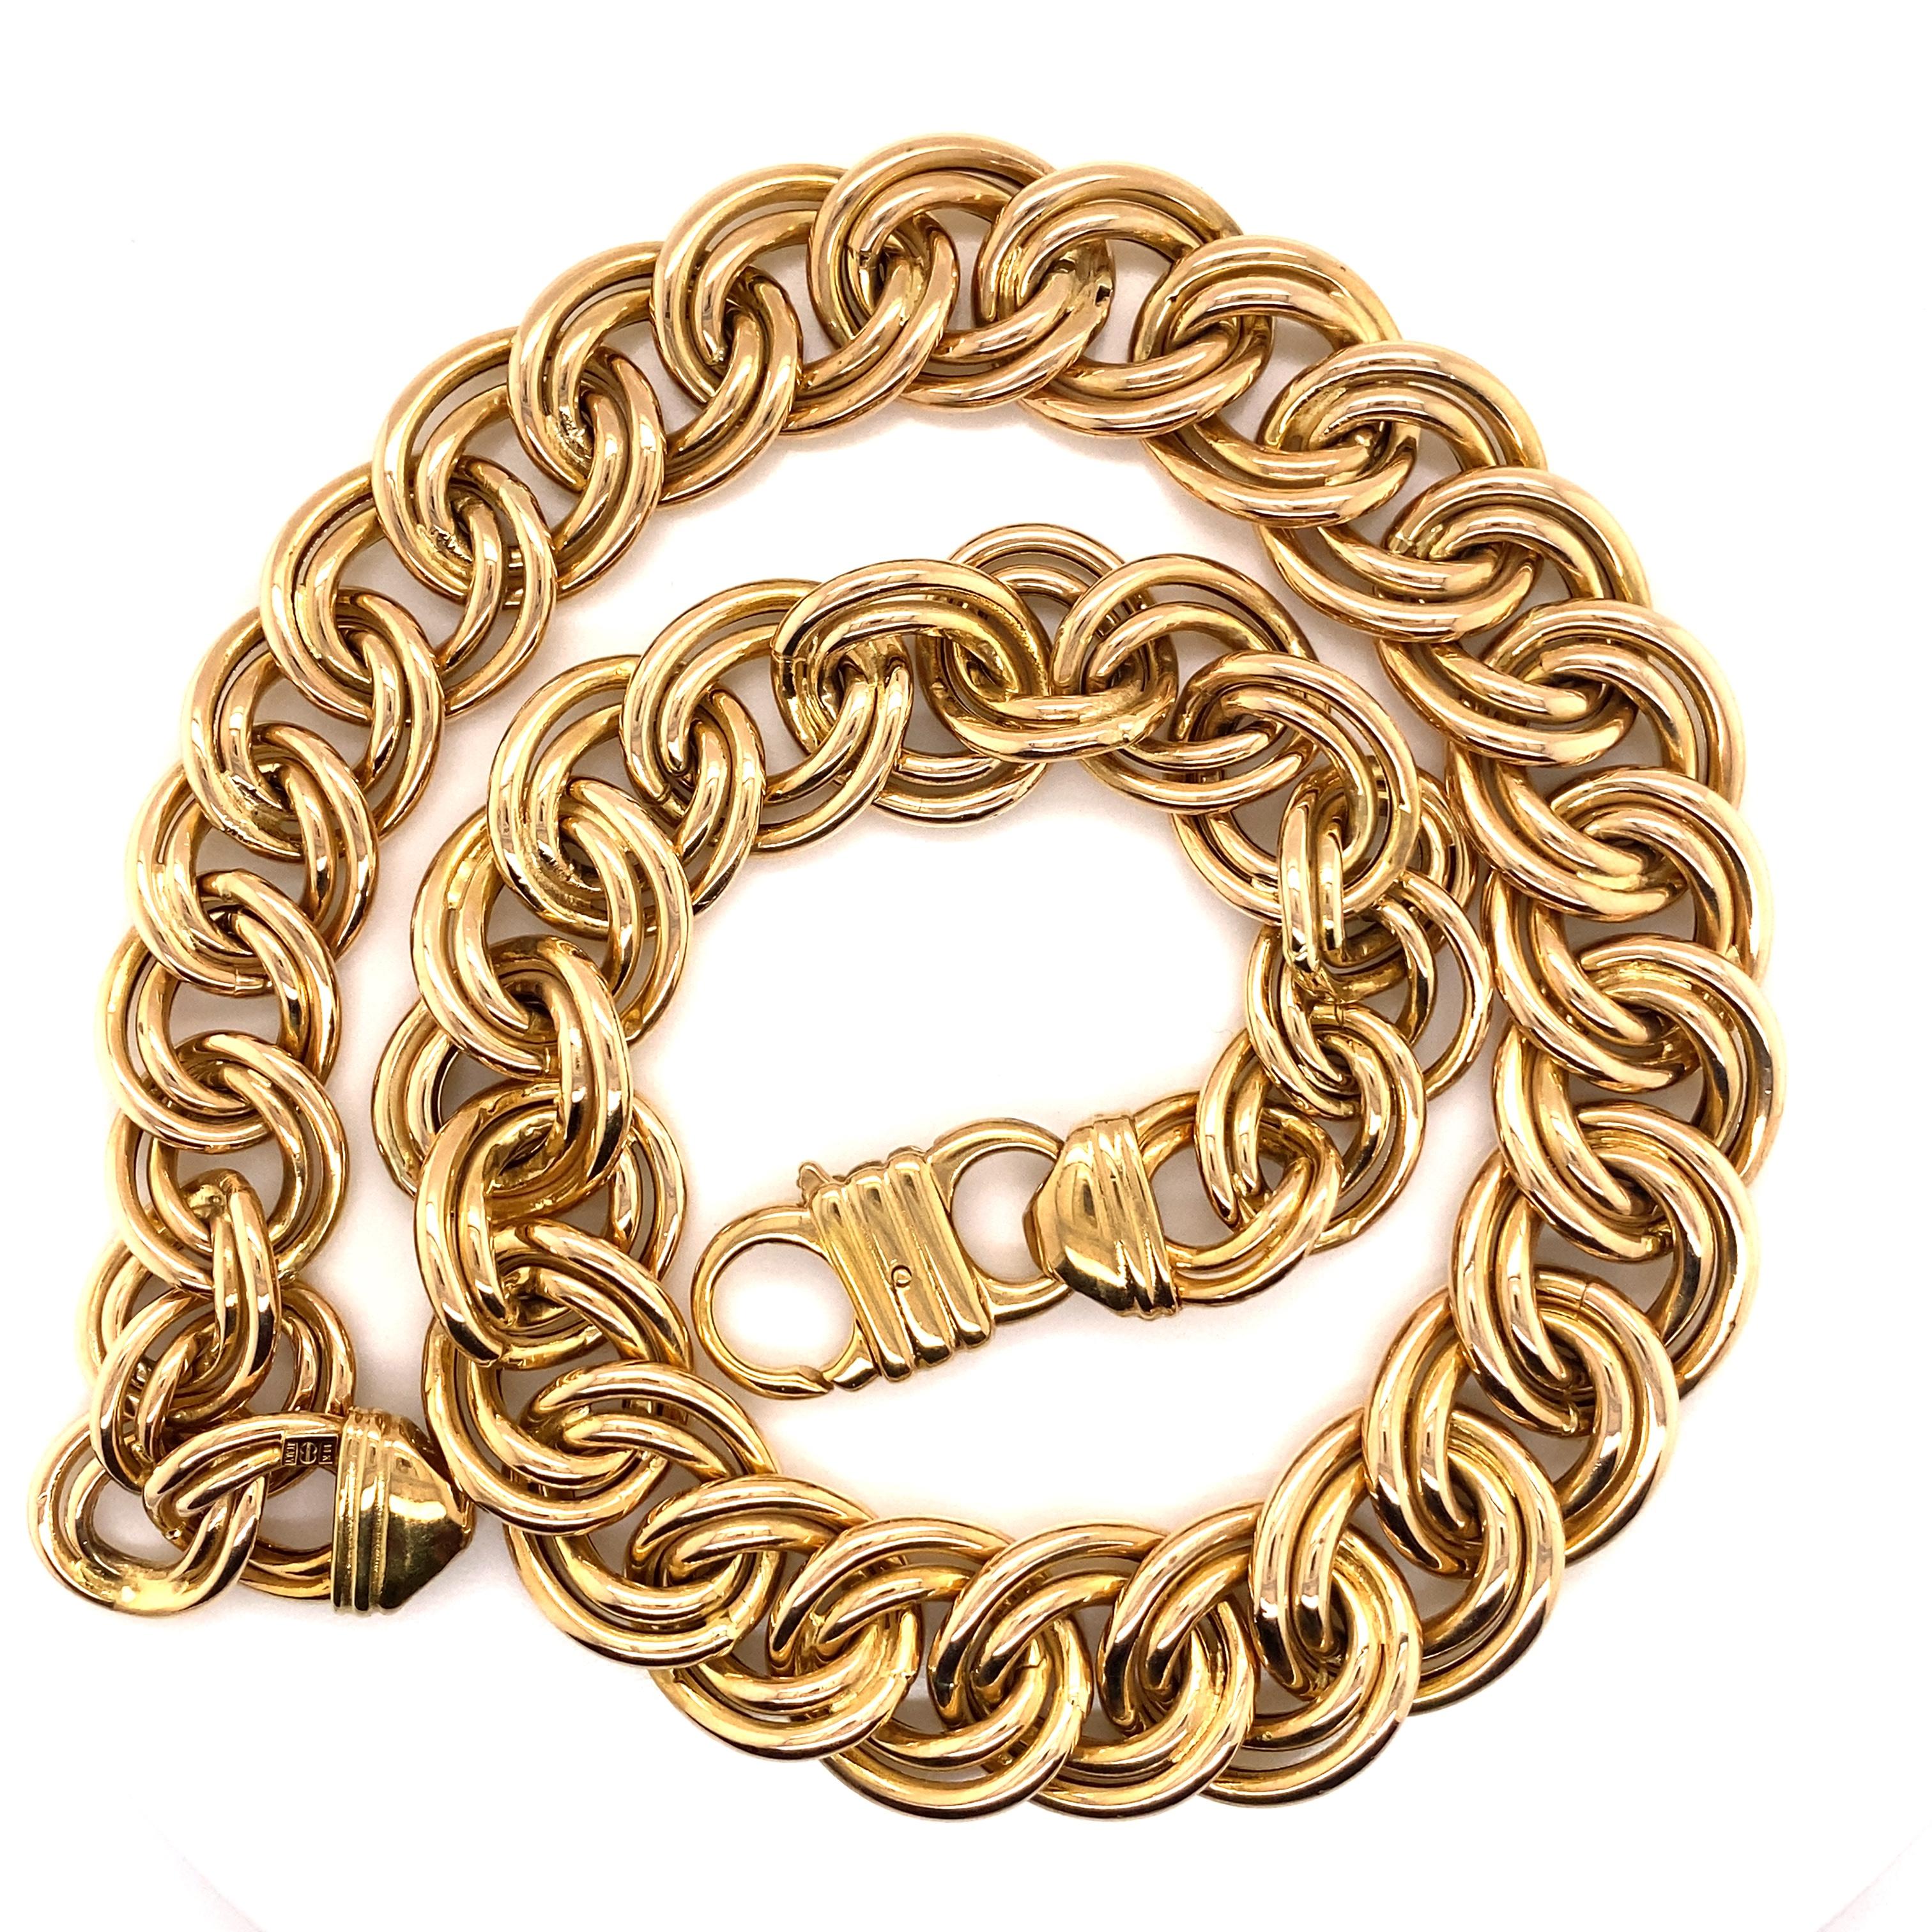 Vintage 1980's 14K Yellow Gold Italian Wide Double Cable Link Necklace - The classic Italian made gold choker necklace features a double cable links that graduate in isze from 3/4 inch in the front to 1/2 inch in the back. The length of necklace is